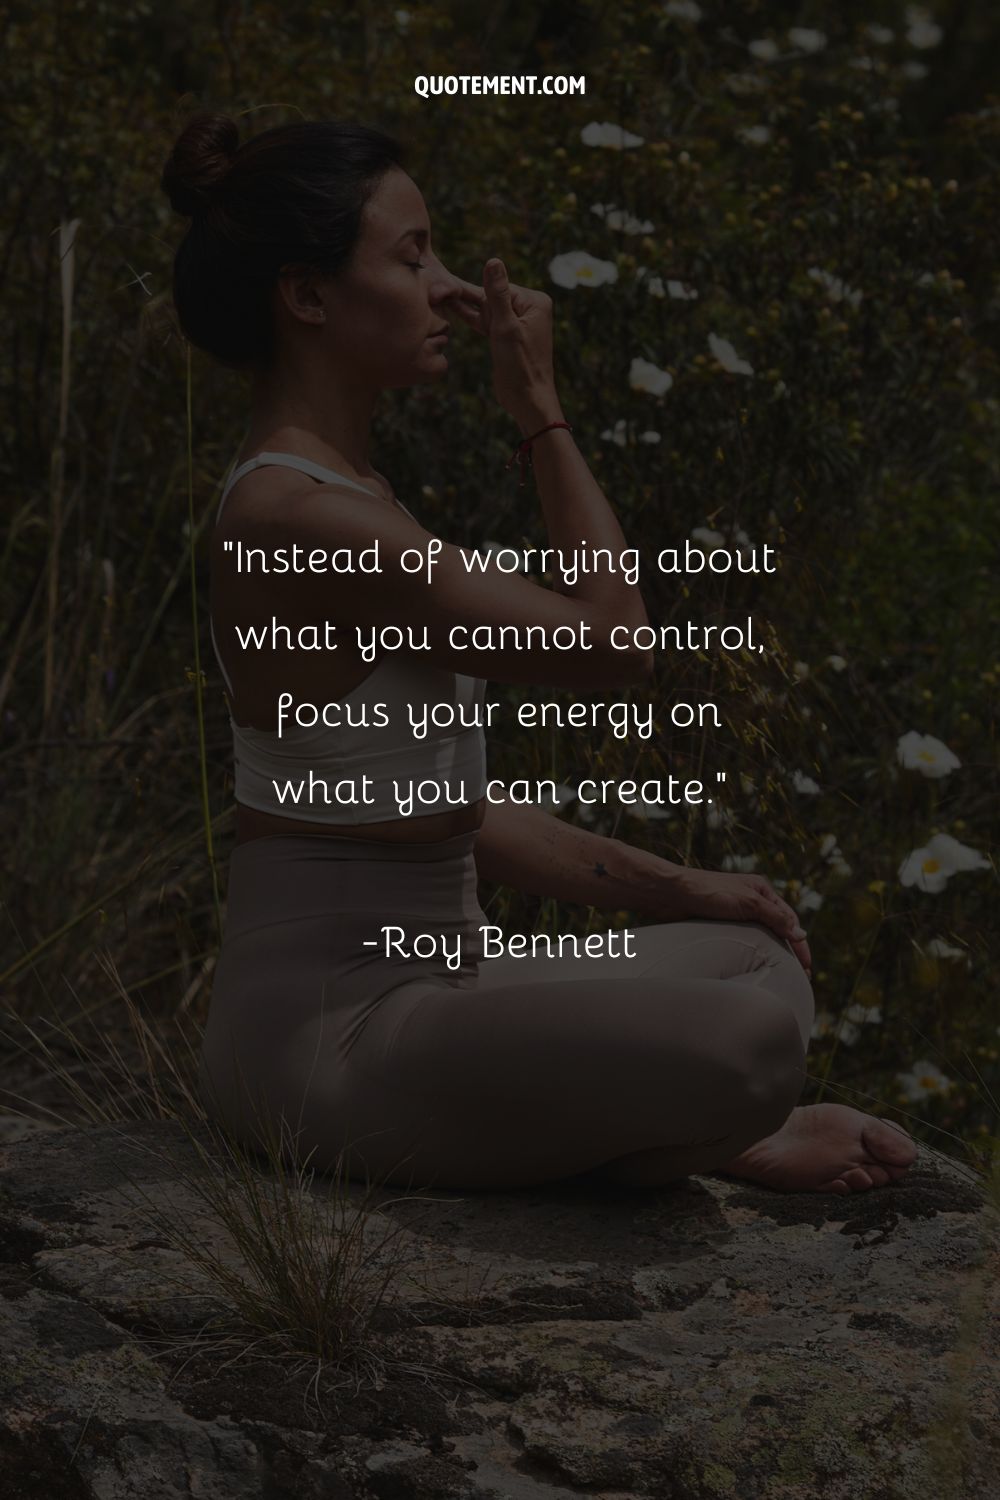 Instead of worrying about what you cannot control, focus your energy on what you can create